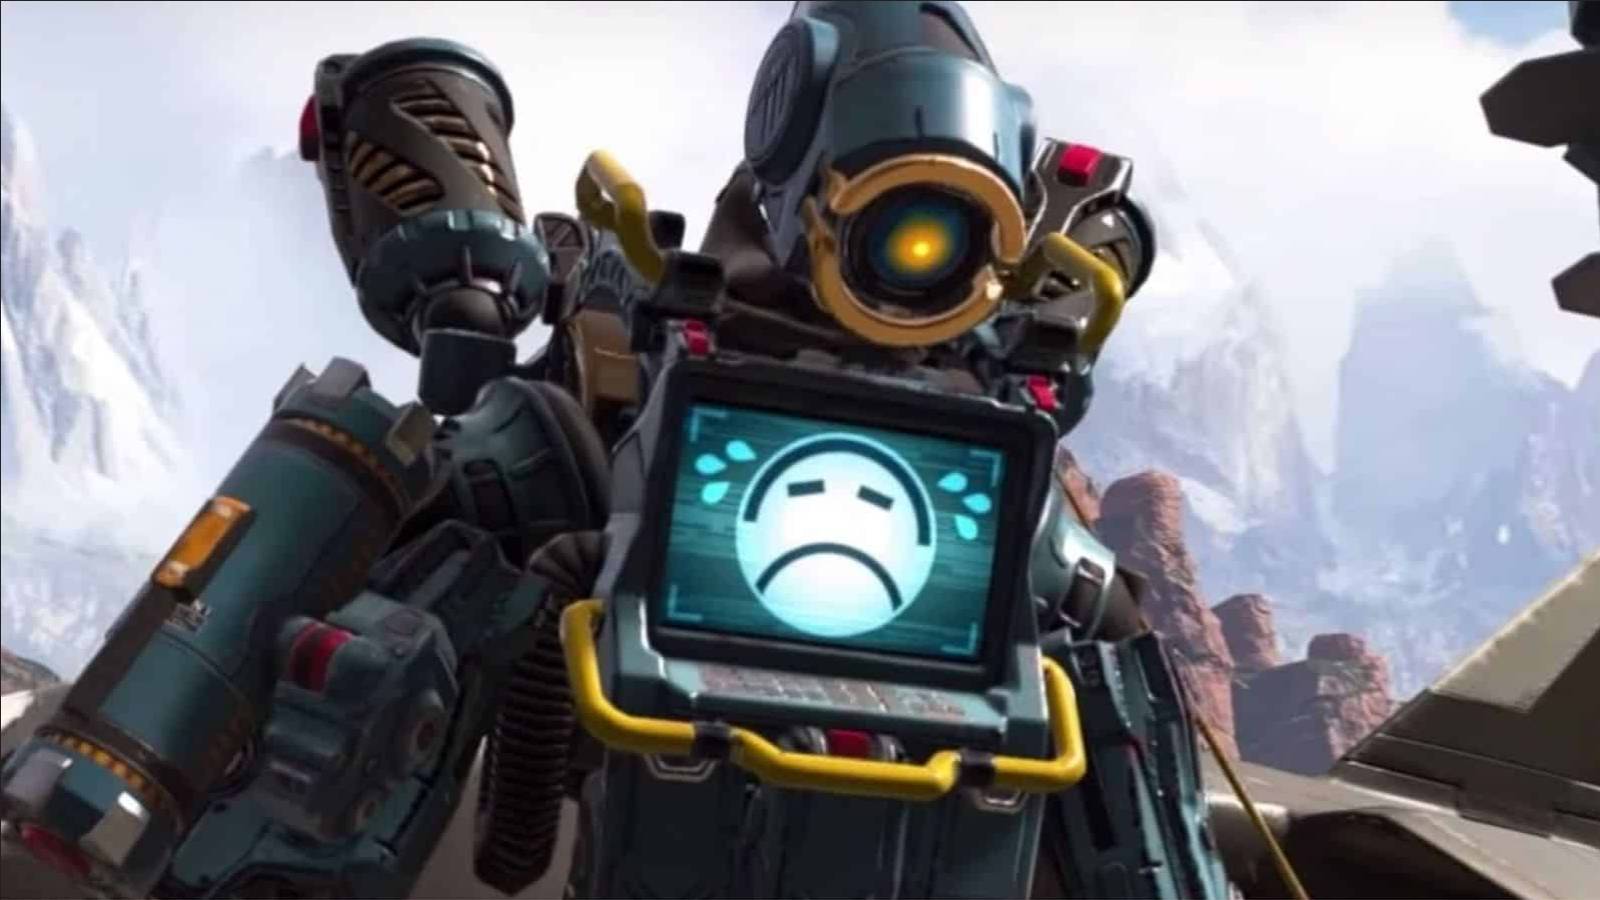 Apex Legends Pathfinder with sad face on screen